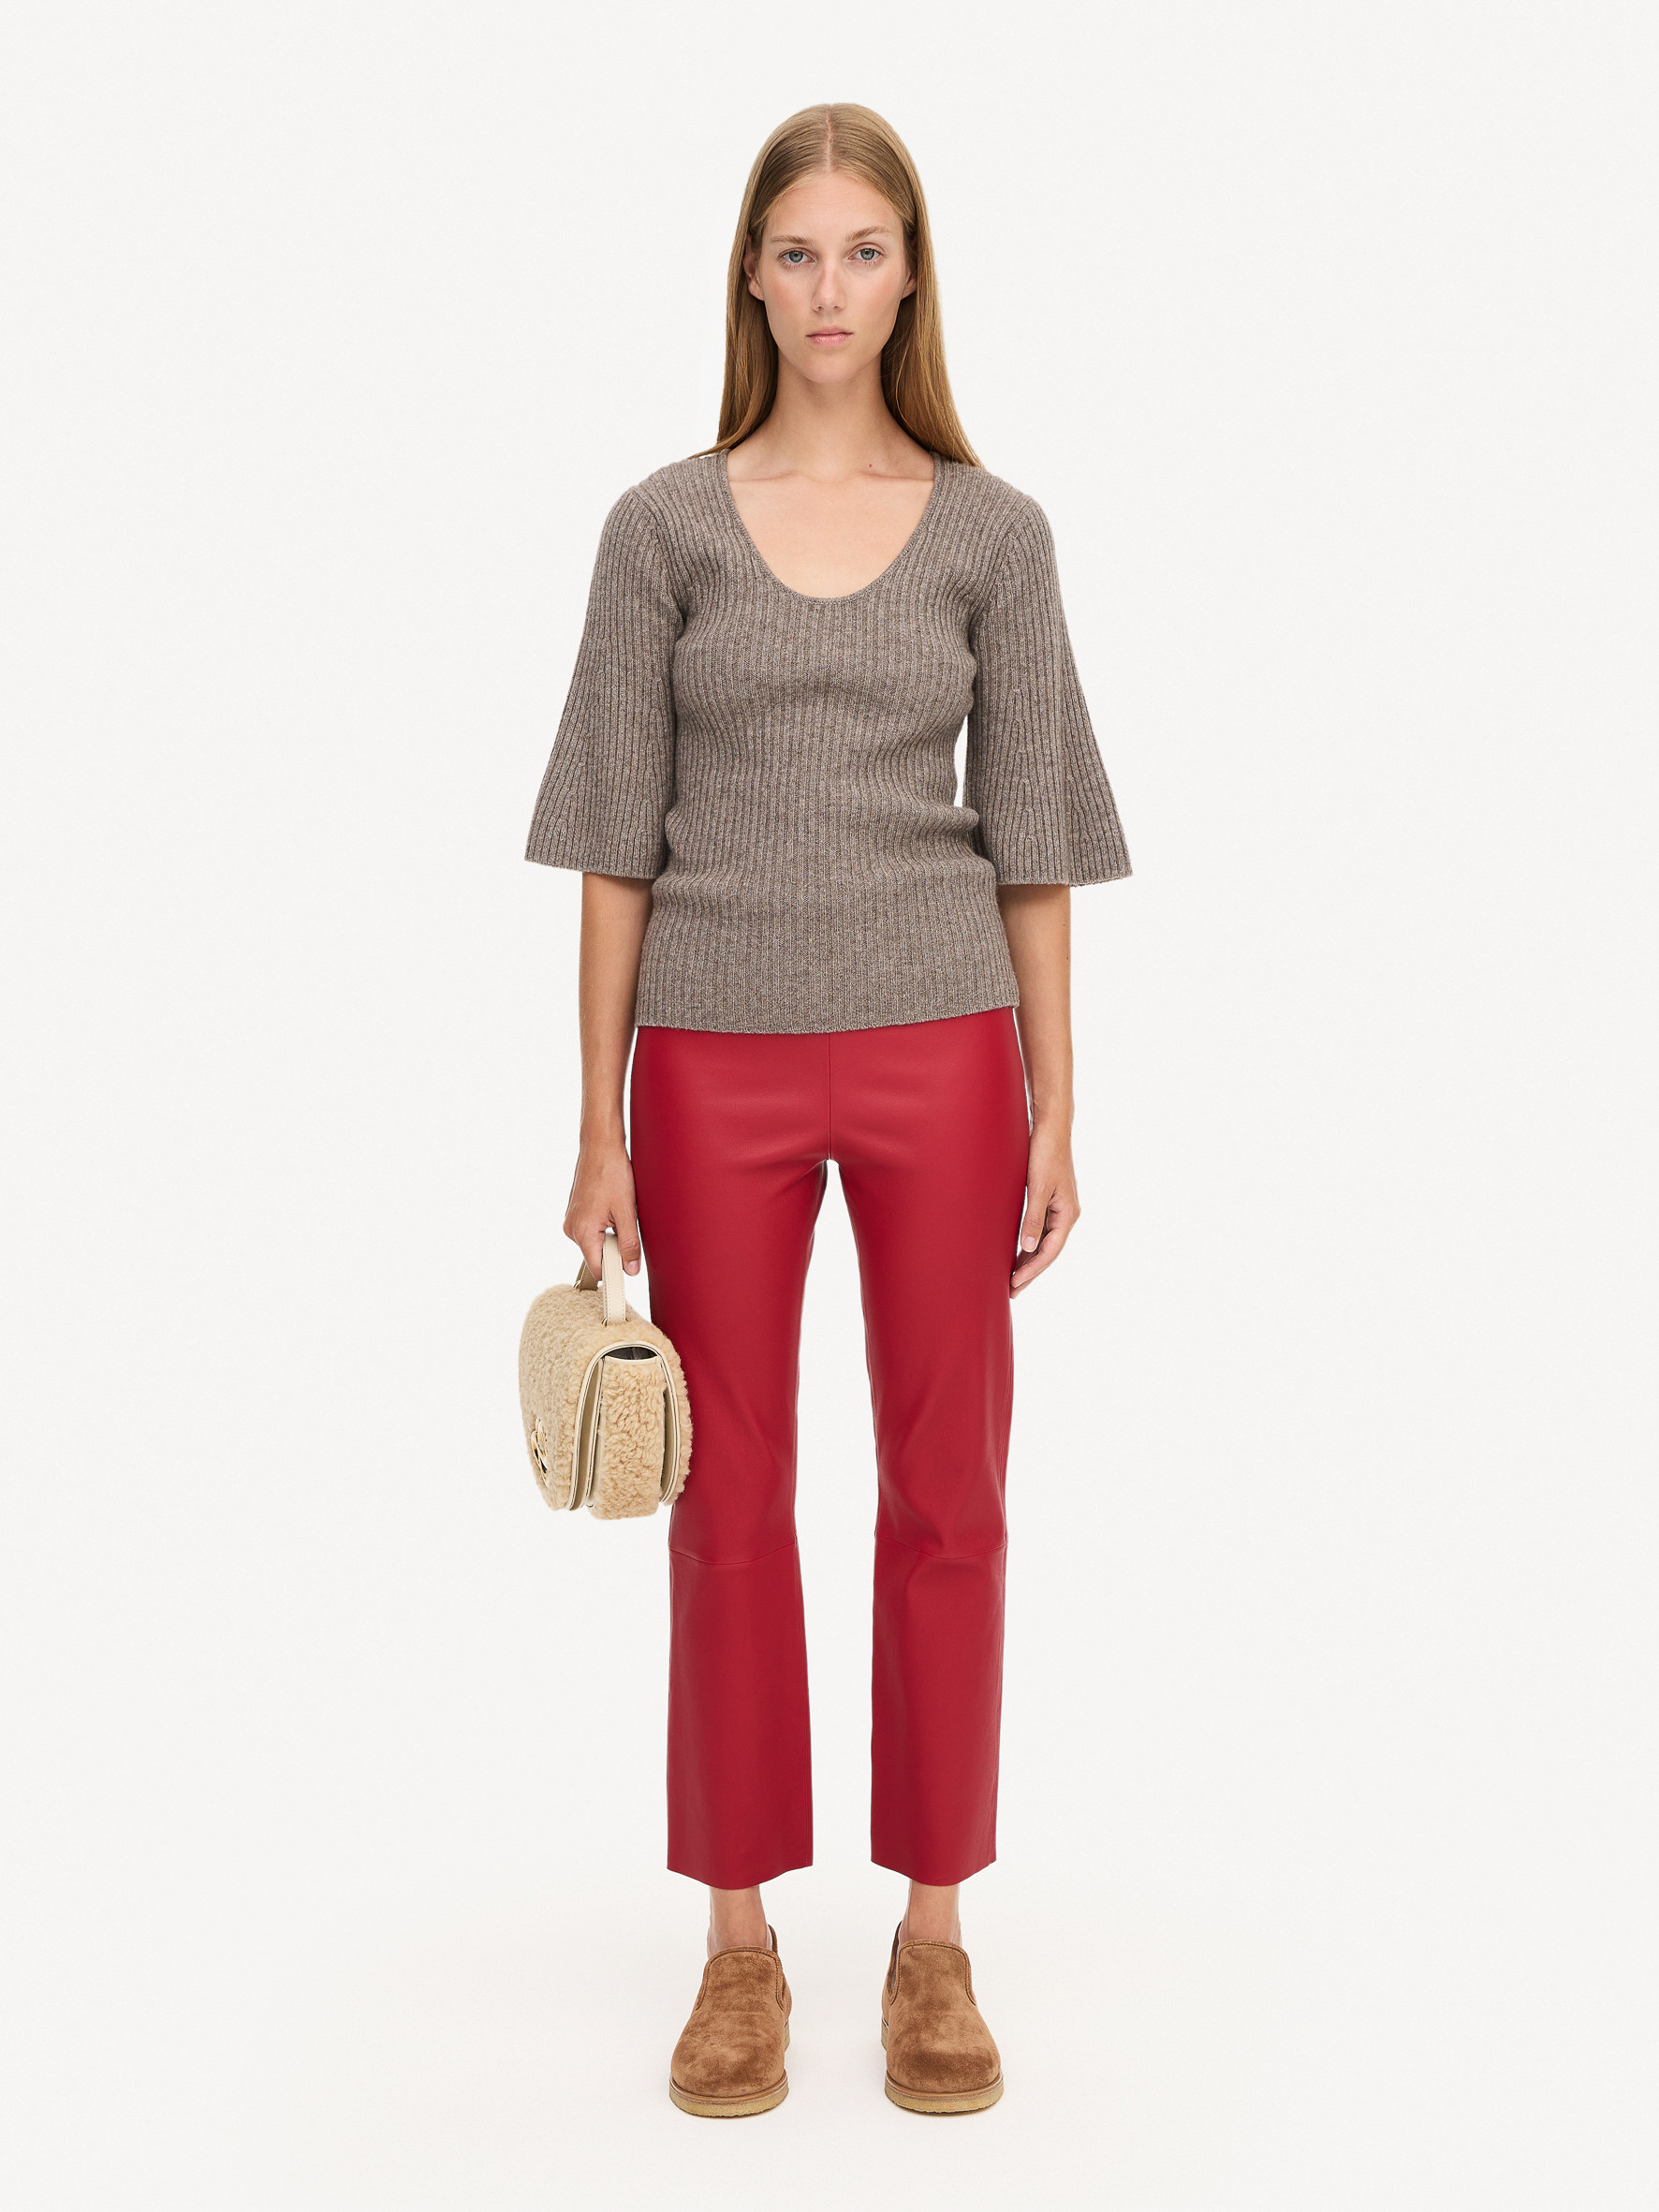 Buy Gap FauxLeather Slim Cropped Trousers from the Gap online shop